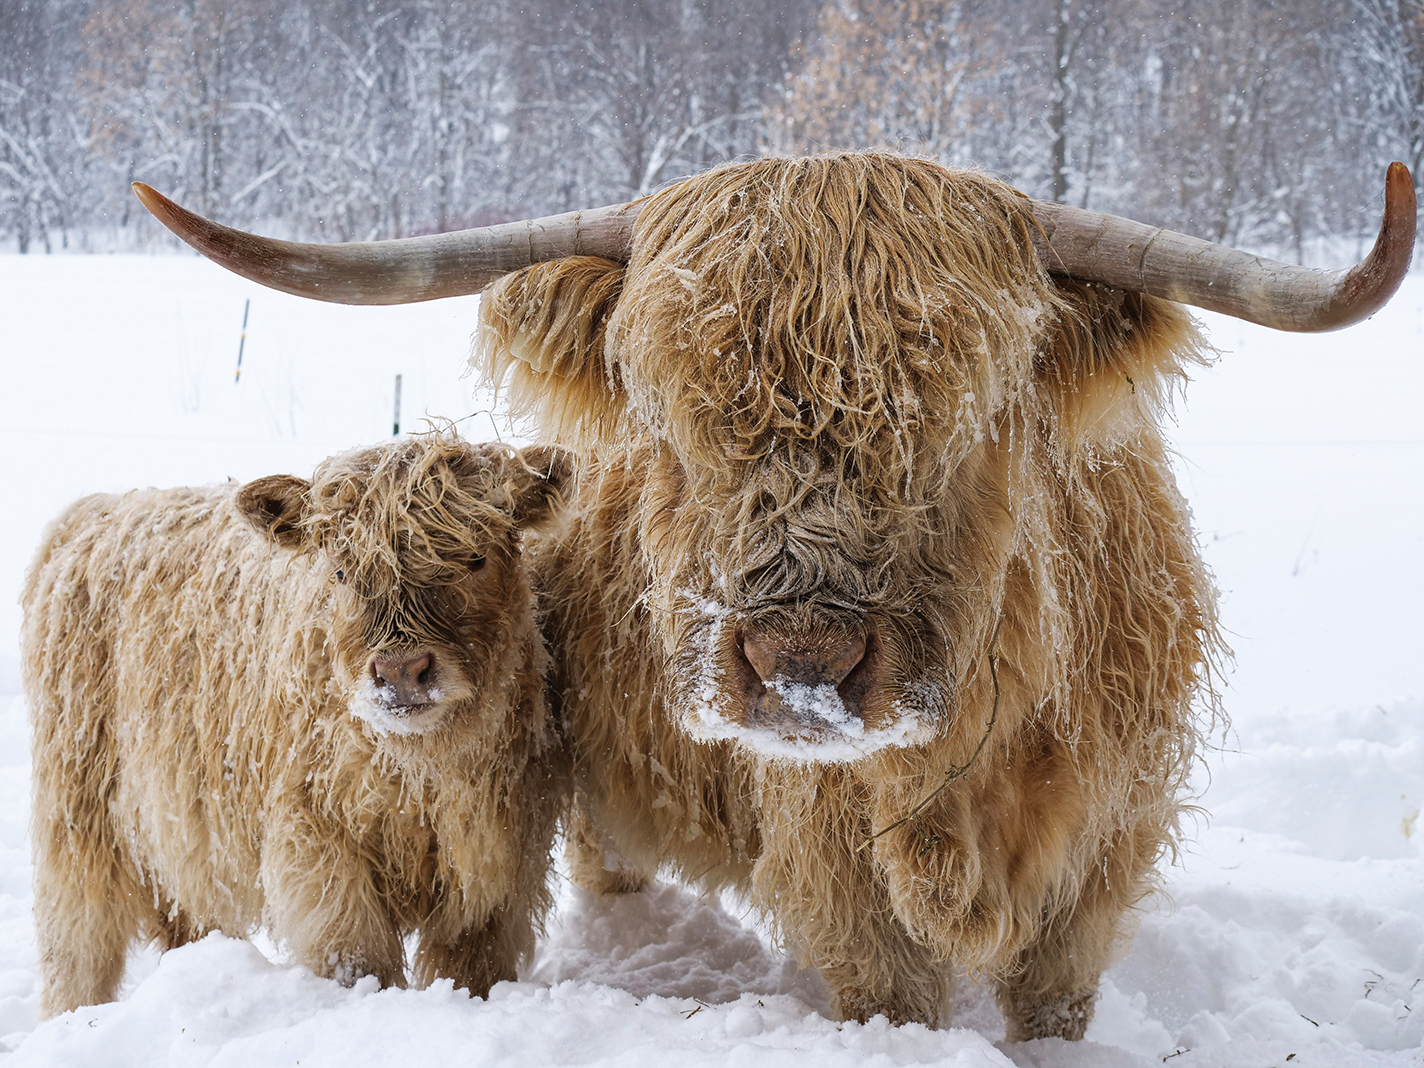 Cassia and her calf Snowball, two Scottish Highland cattle in Minnesota